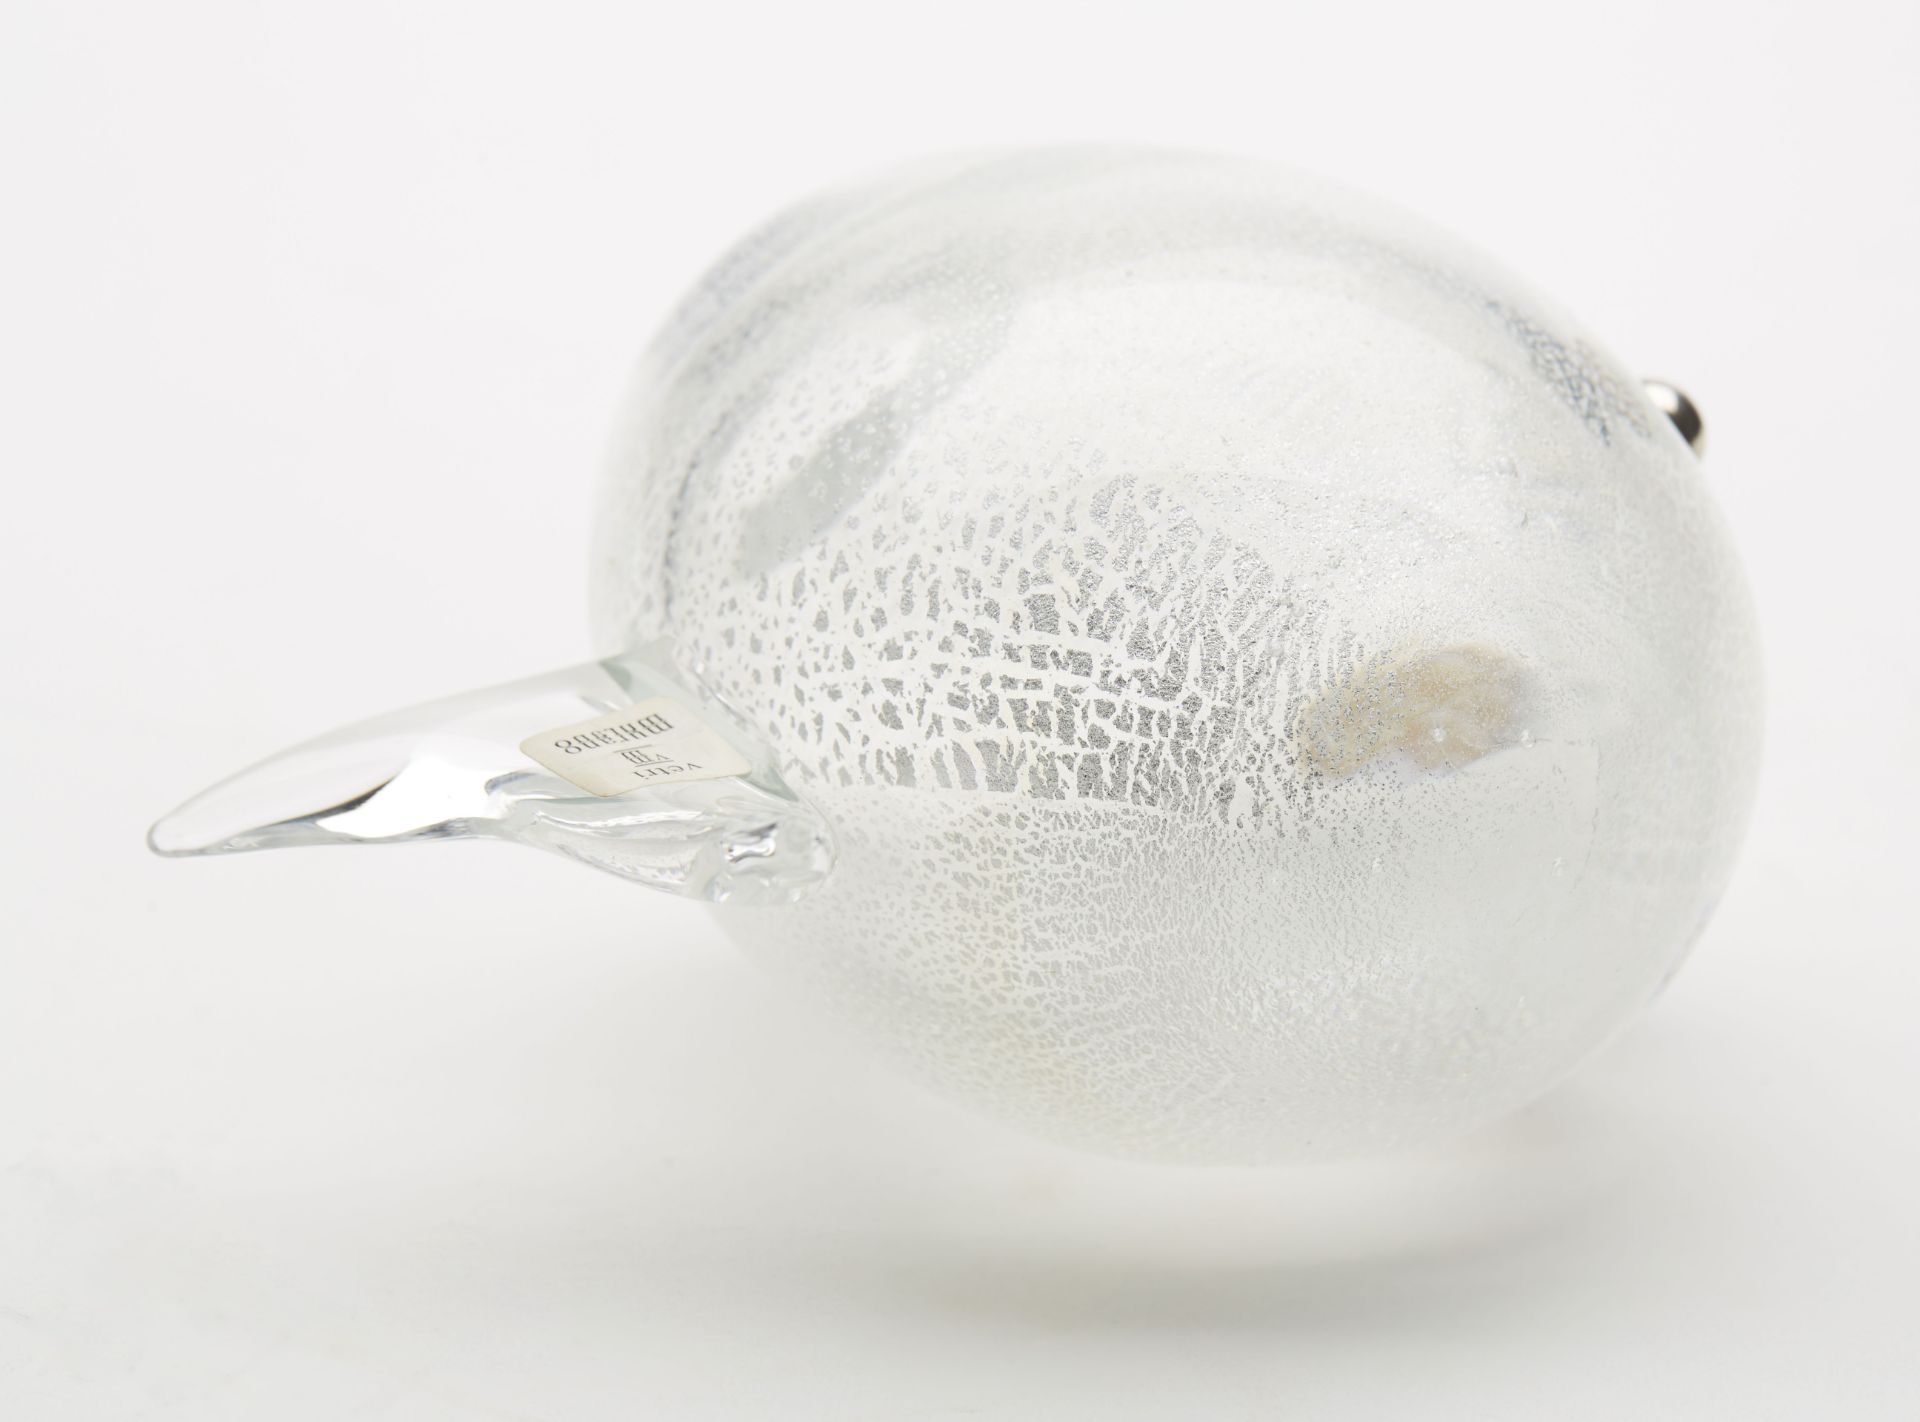 VINTAGE VETRI MURANO FISH WITH SILVER INCLUSIONS 20TH C. - Image 7 of 8